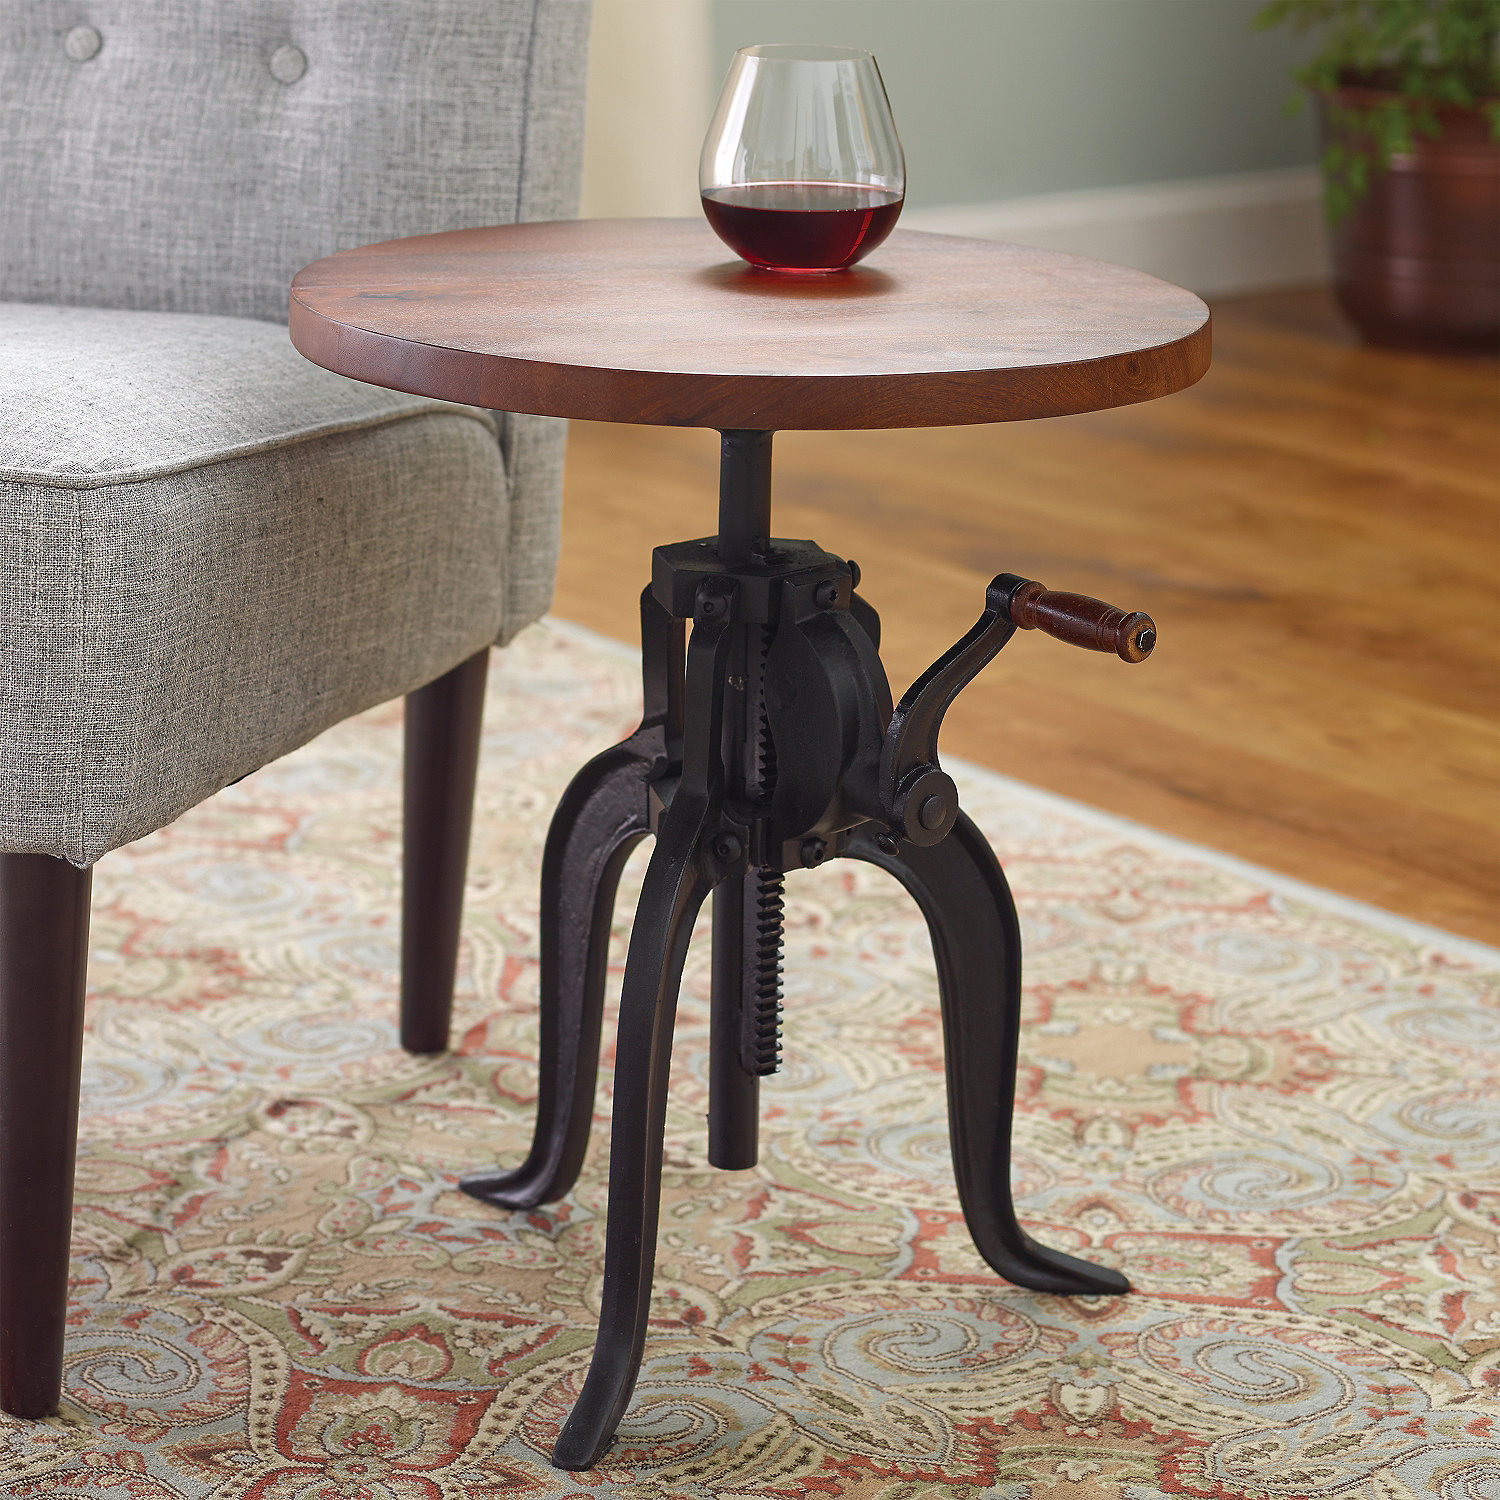 homemade table probably super great slim end tables with drink barrel cork catcher accent wine enthusiast holders industrial crank base drinks cement dining corner designs for